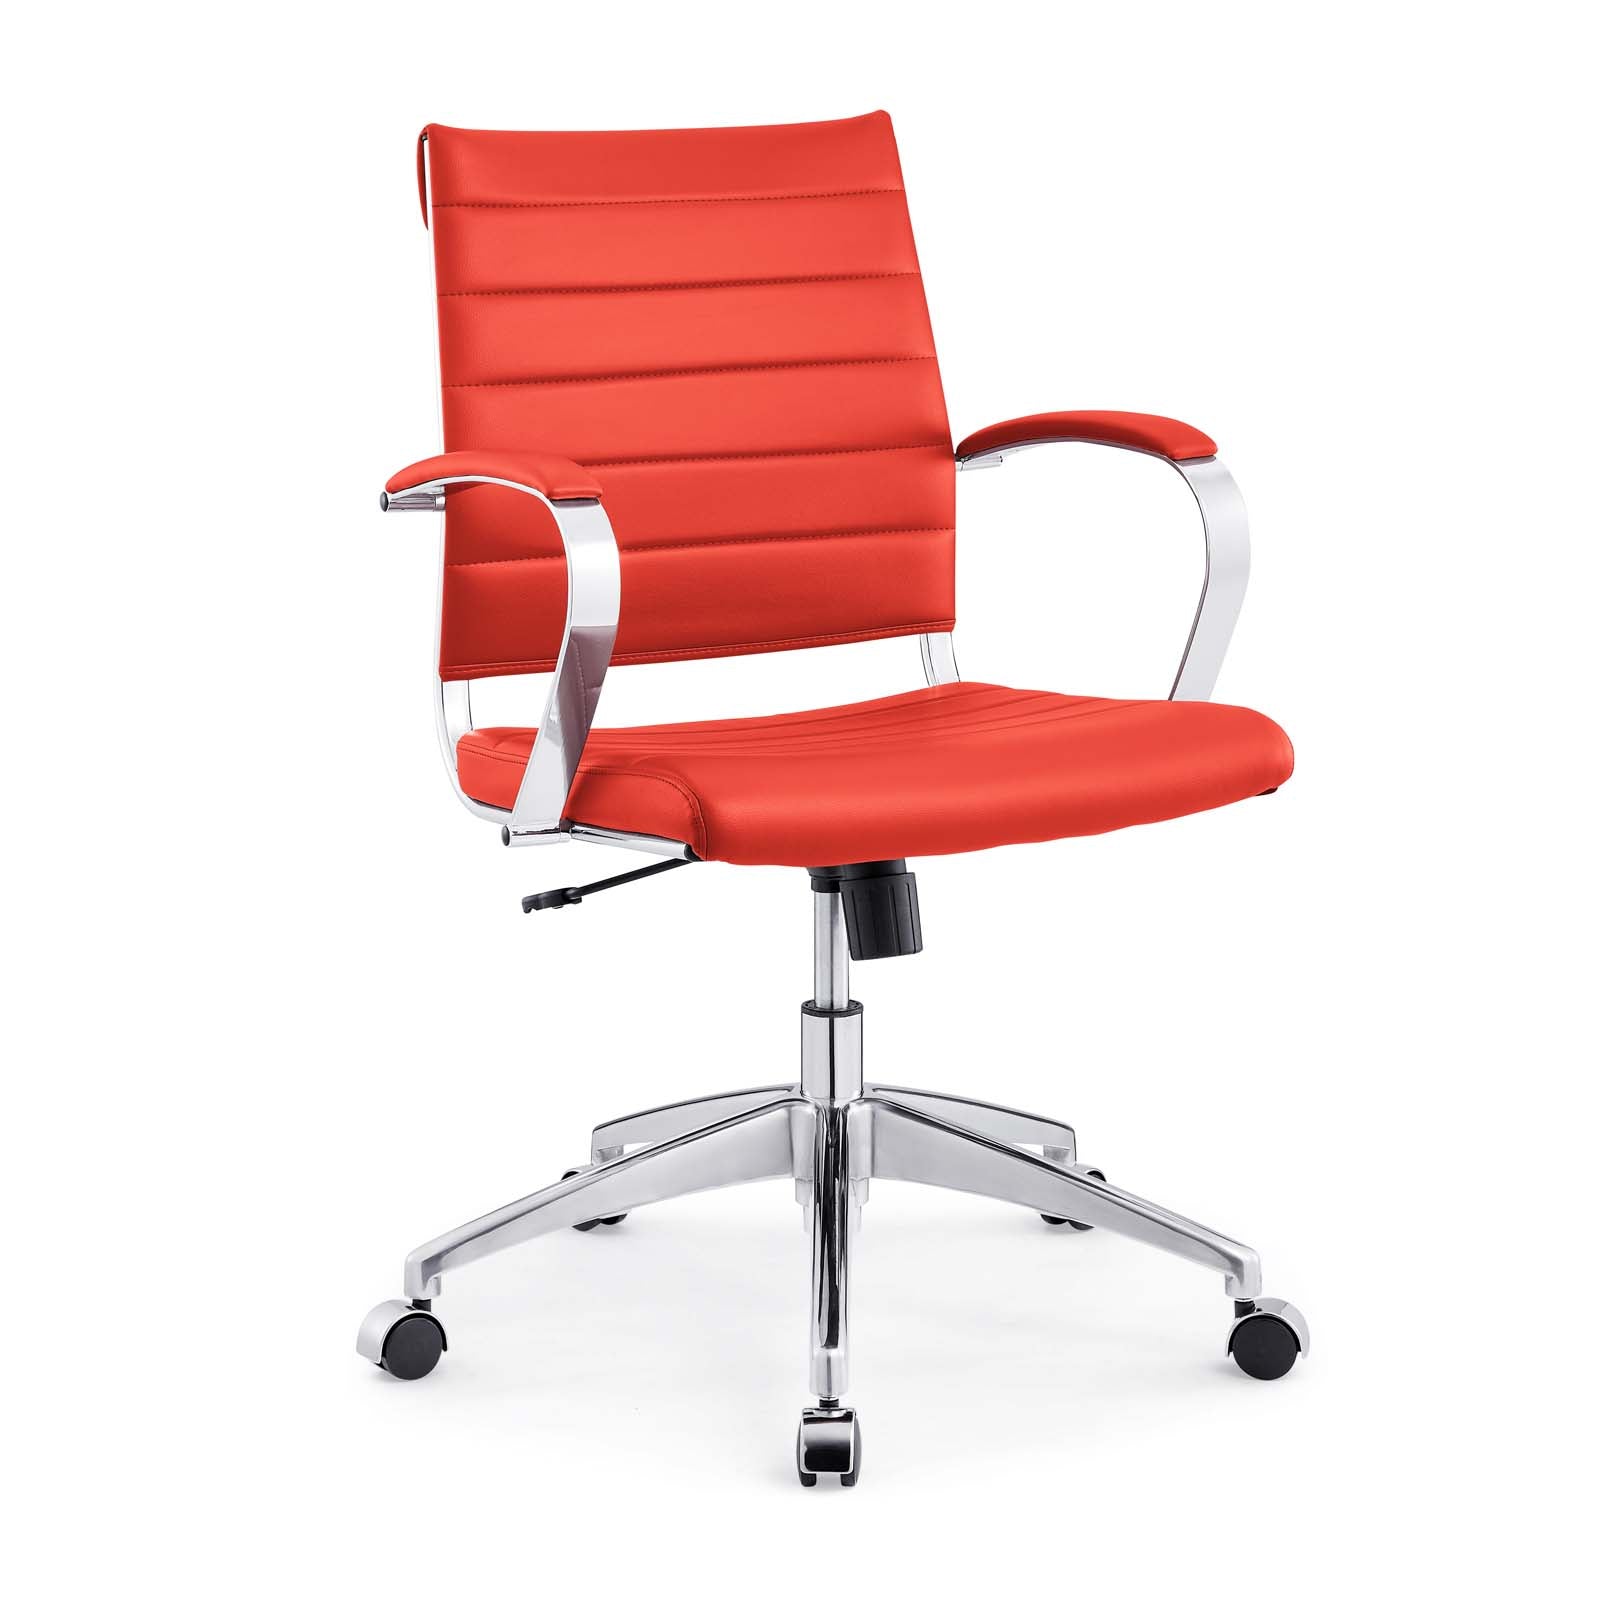 Buy Orange Jive Mid Back Office Chair at BUILDMyplace